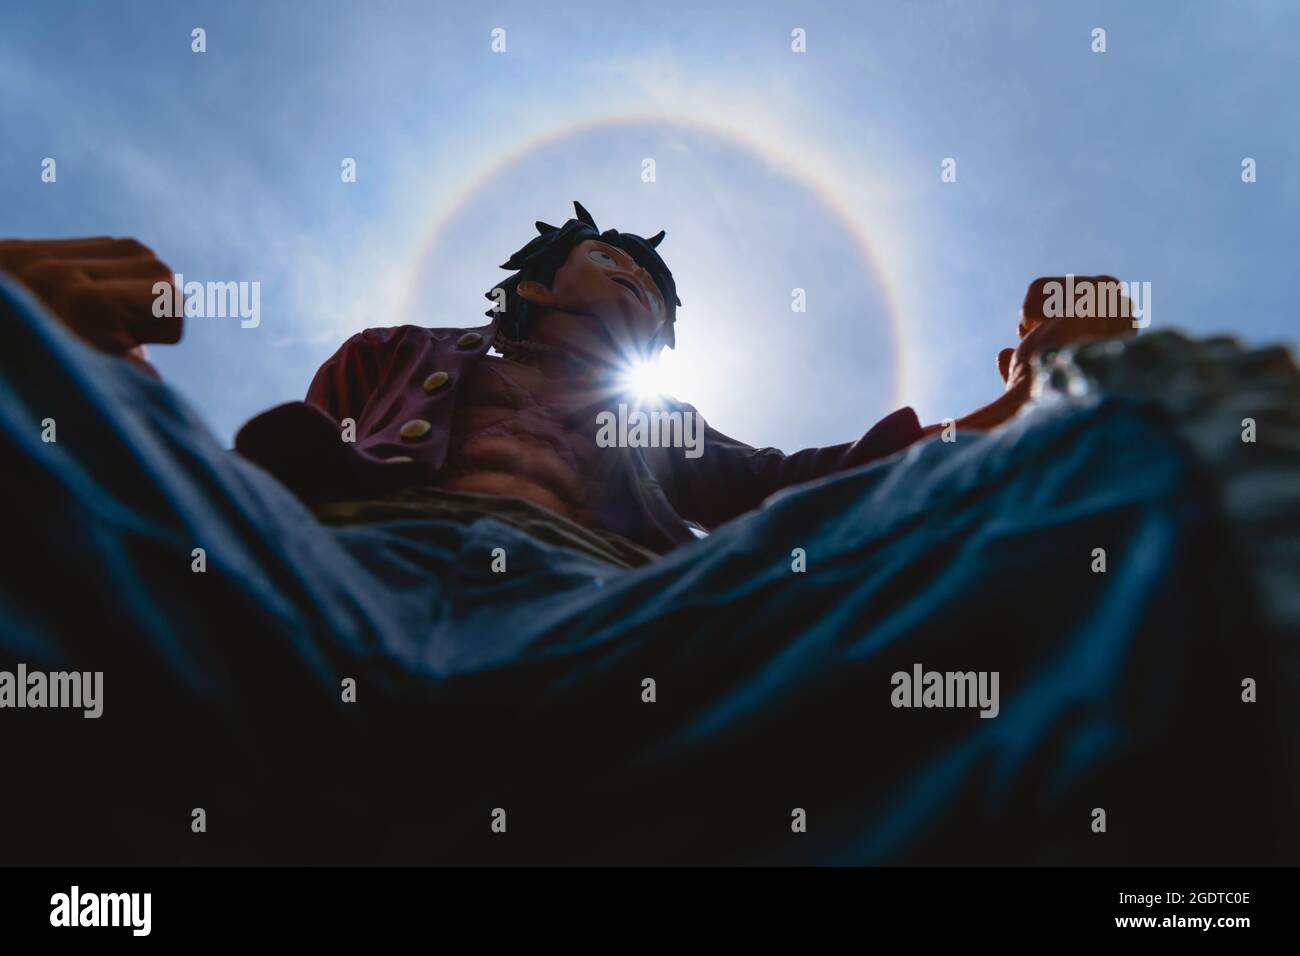 Bangkok, Thailand - August 14, 2021 : Plastic figurine of Money D.Luffy from One Piece animation with fantastic sun halo. Editorial use only Stock Photo